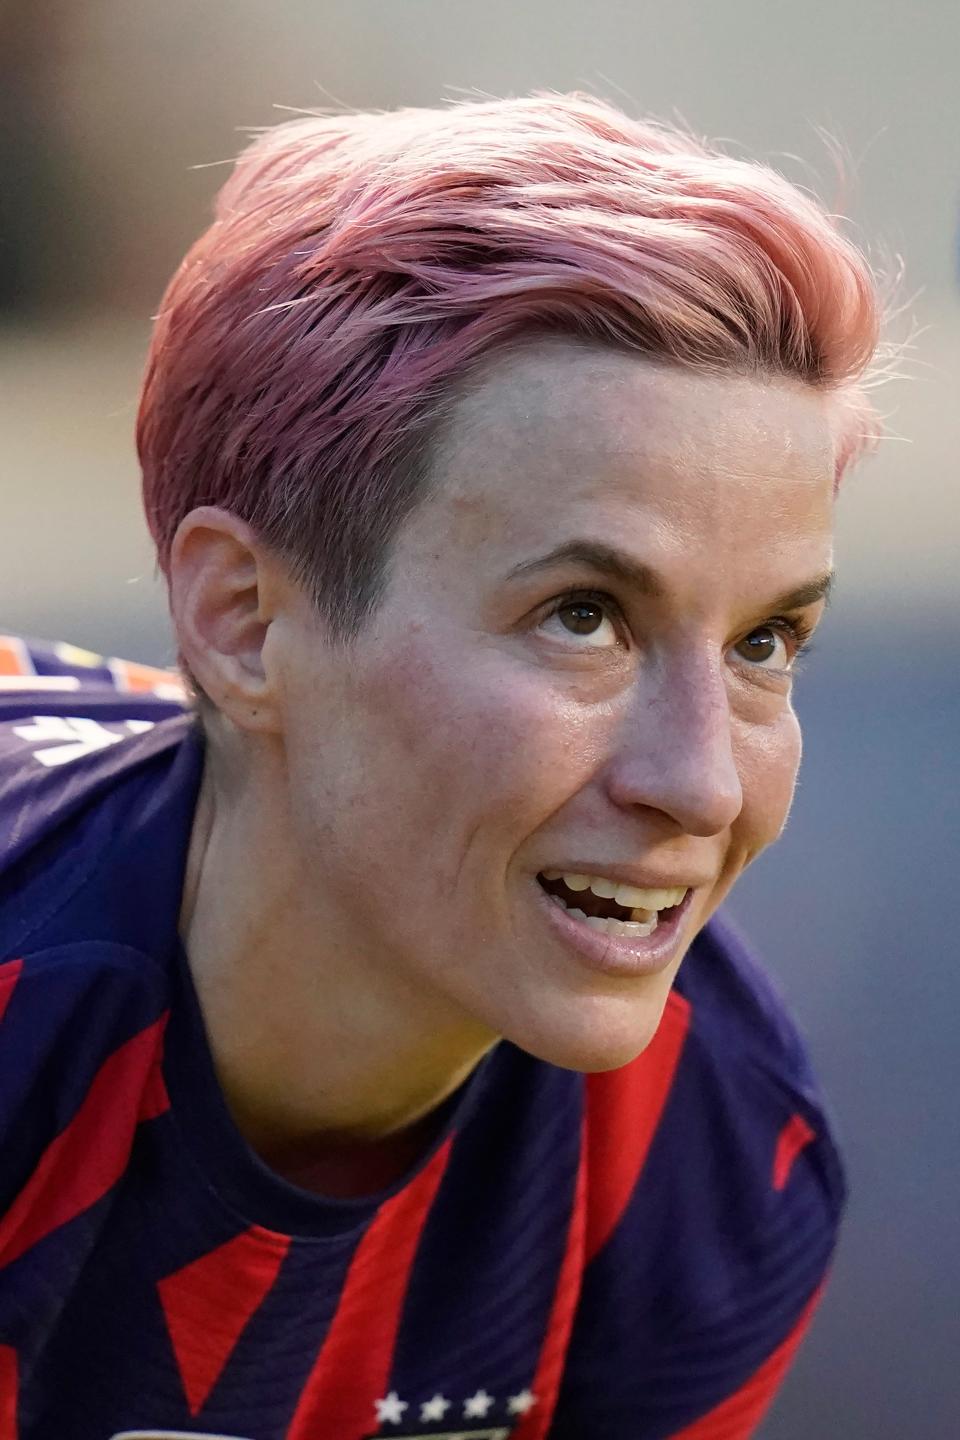 U.S. forward and Palo Cedro native Megan Rapinoe watches during the first half of the team's international friendly soccer match against Colombia on Tuesday, June 28, 2022, in Sandy, Utah.